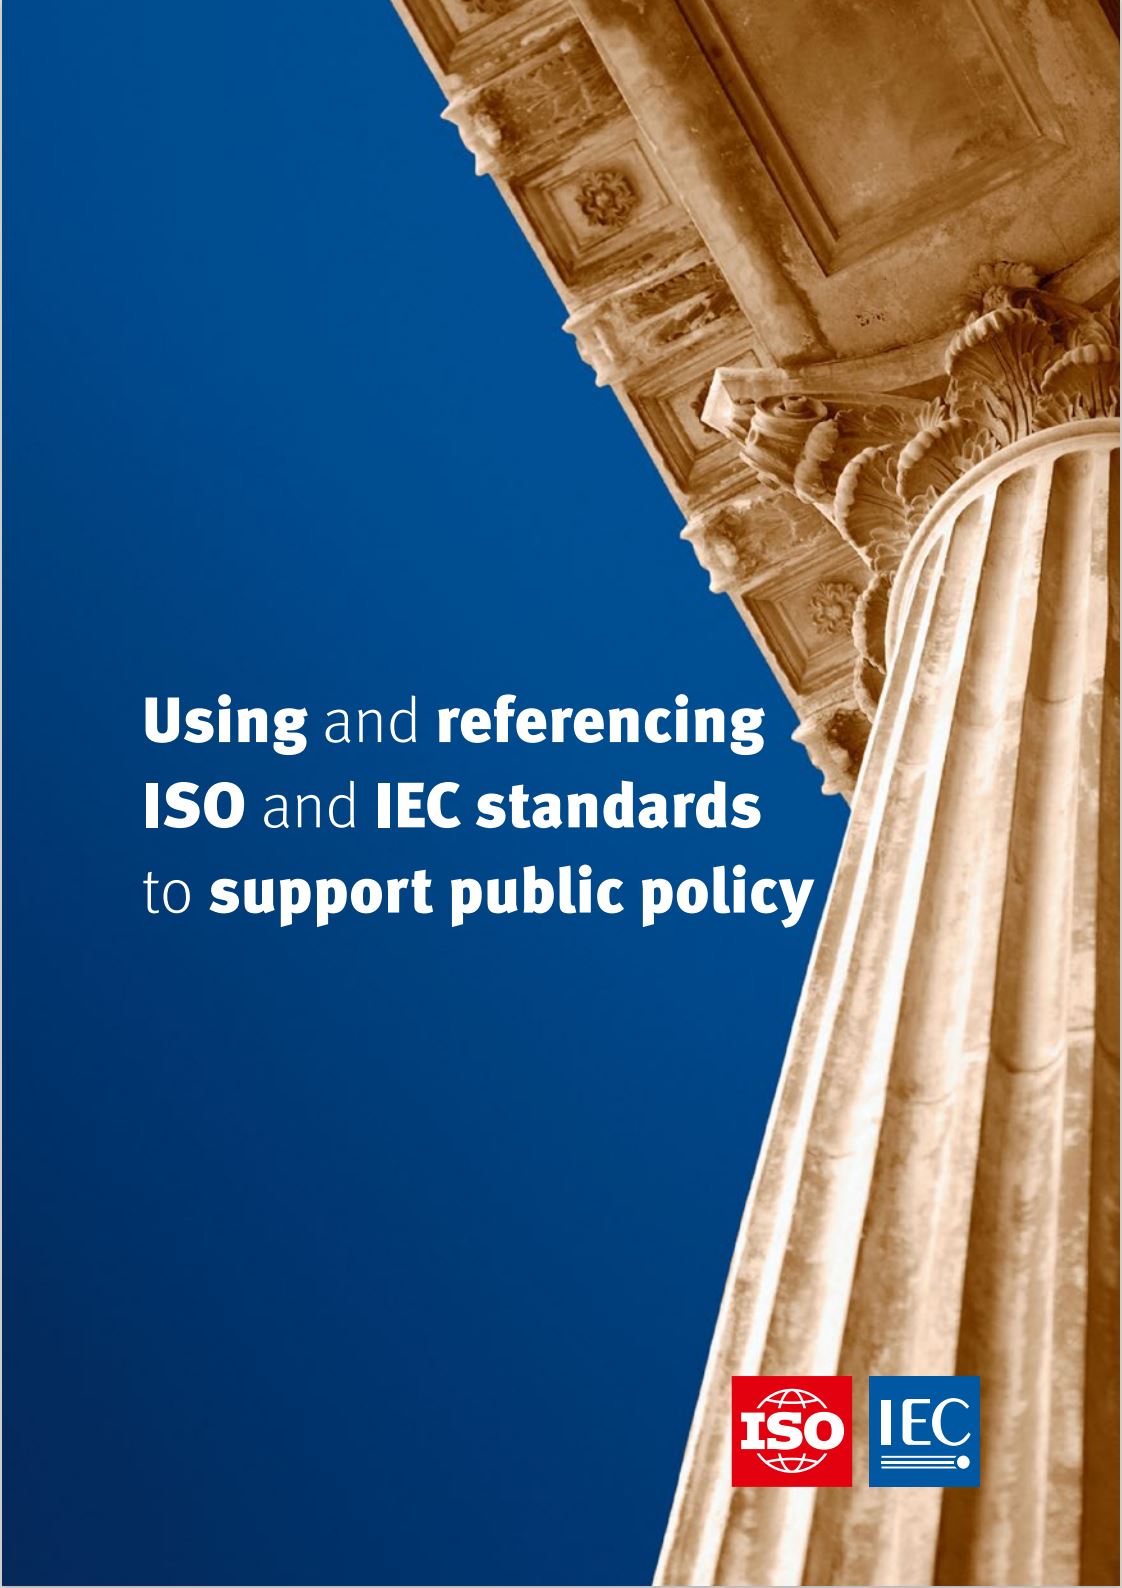 USING AND REFERENCING ISO AND IEC STANDARDS TO SUPPORT PUBLIC POLICY